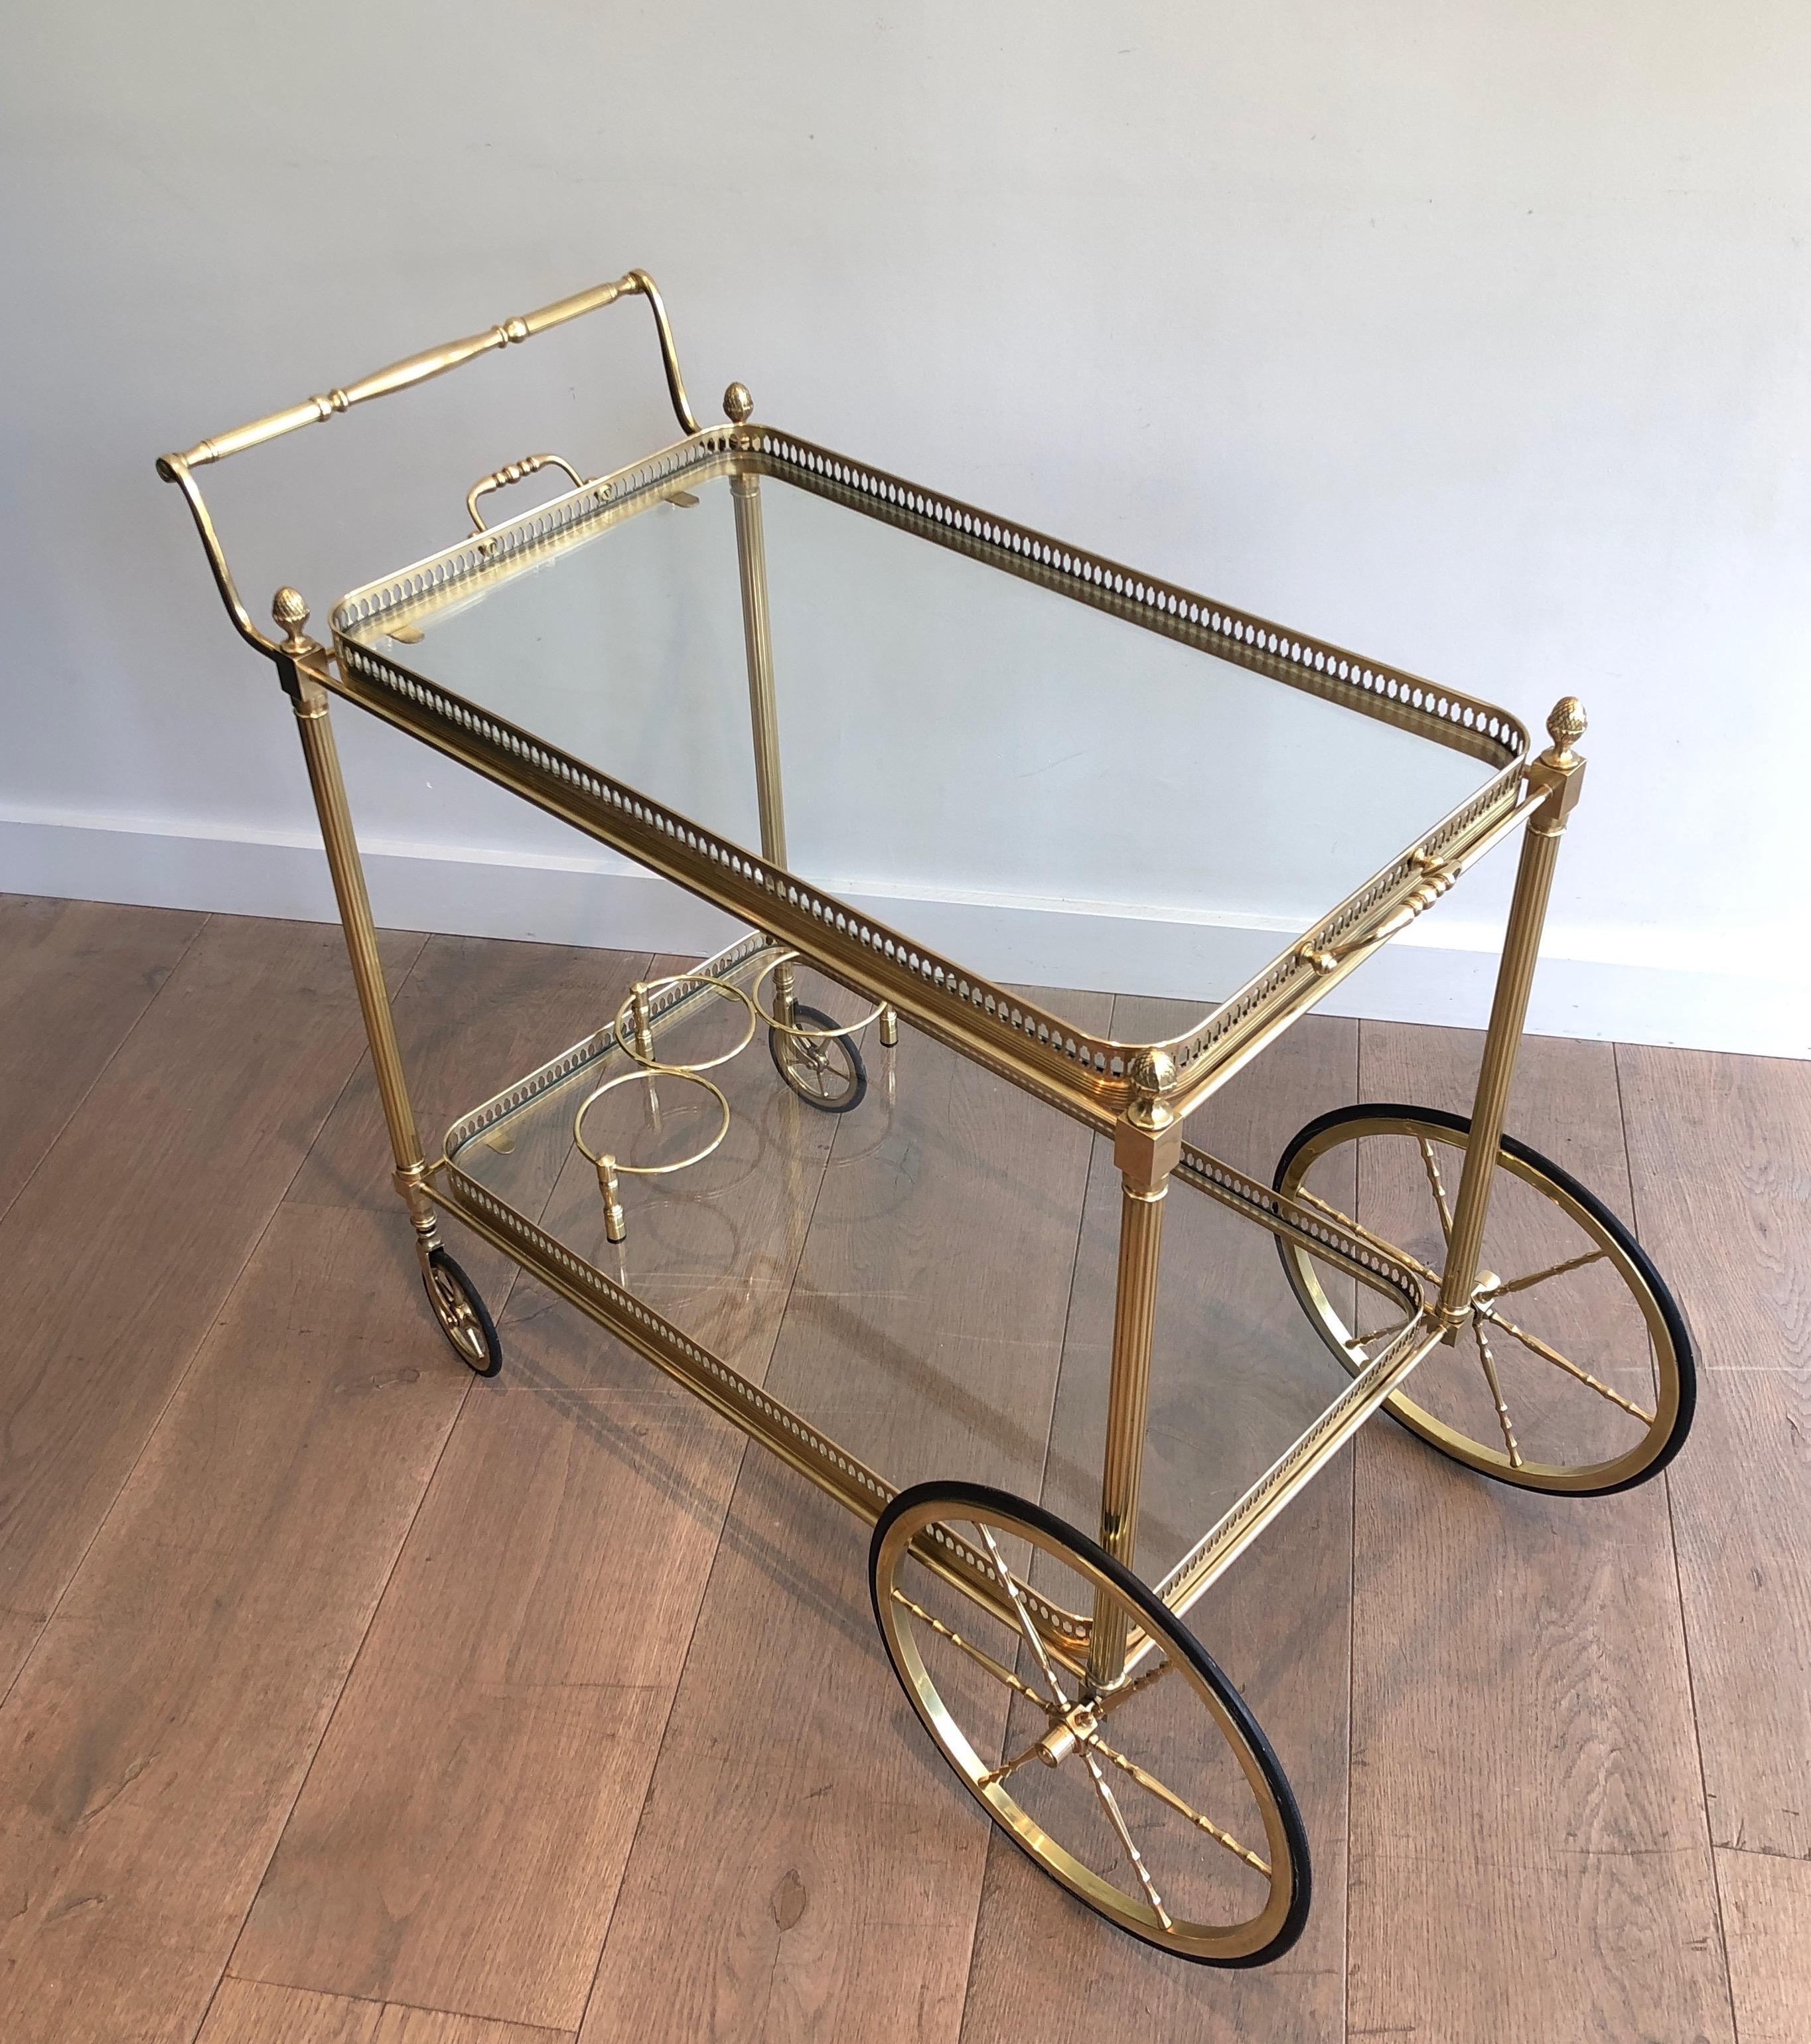 This neoclassical style drinks trolley is made of brass with two removable trays. This is a fine work with nice finely chiseled details. This is a French work by Maison Jansen. Circa 1940